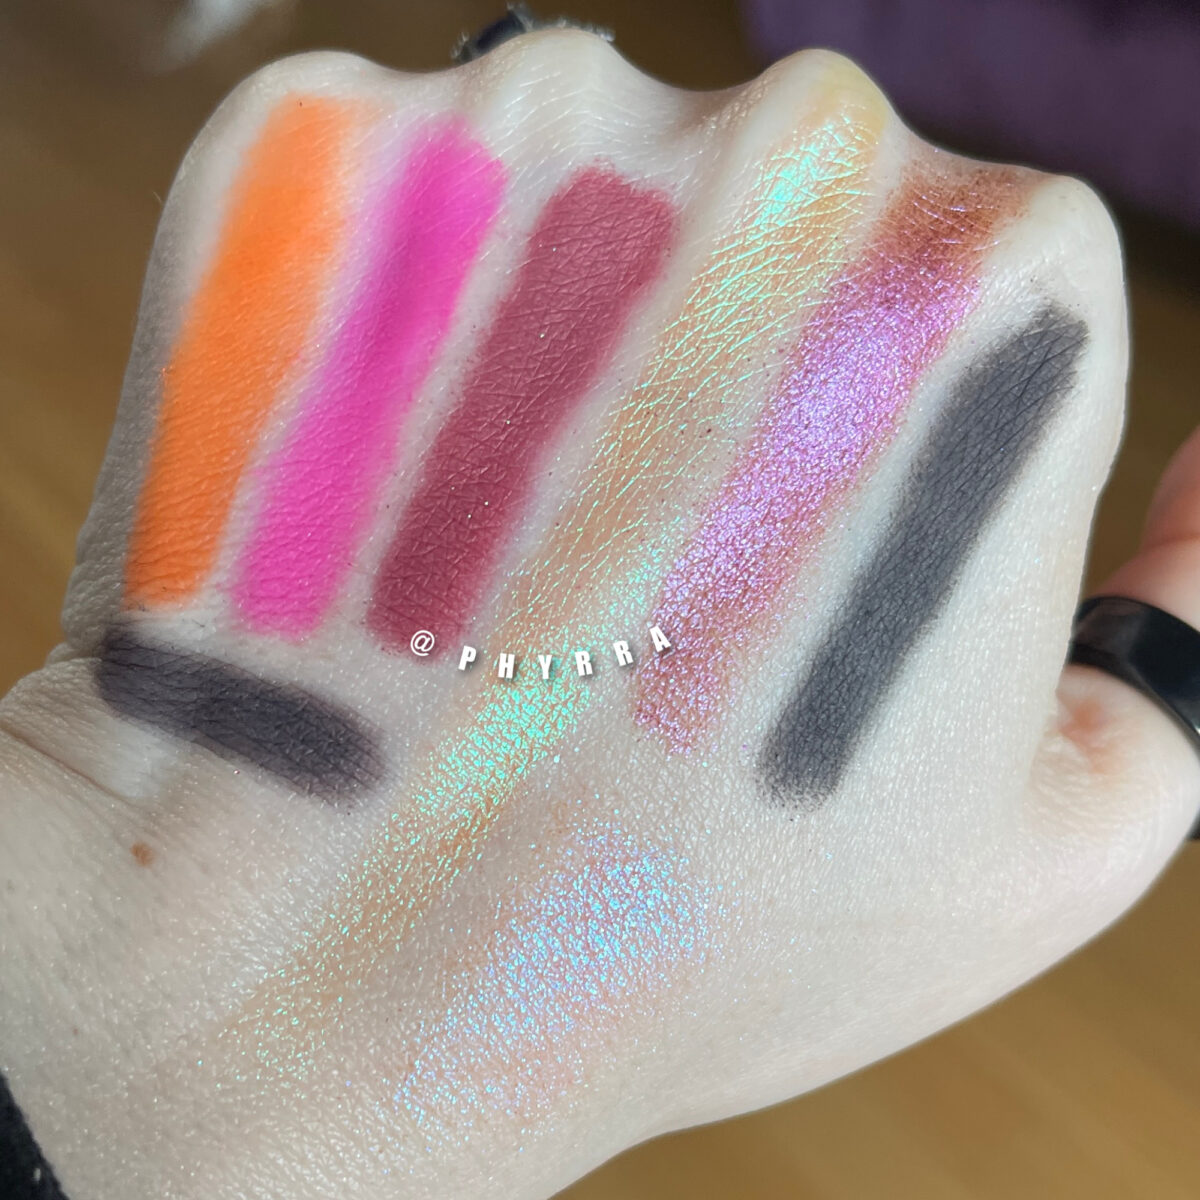 Devinah Fairy Fire, Starfire, Patrina, Karma swatches, Lethal Monarch, Thorn, Cascade swatches, Karla Moody Cow swatches on pale skin